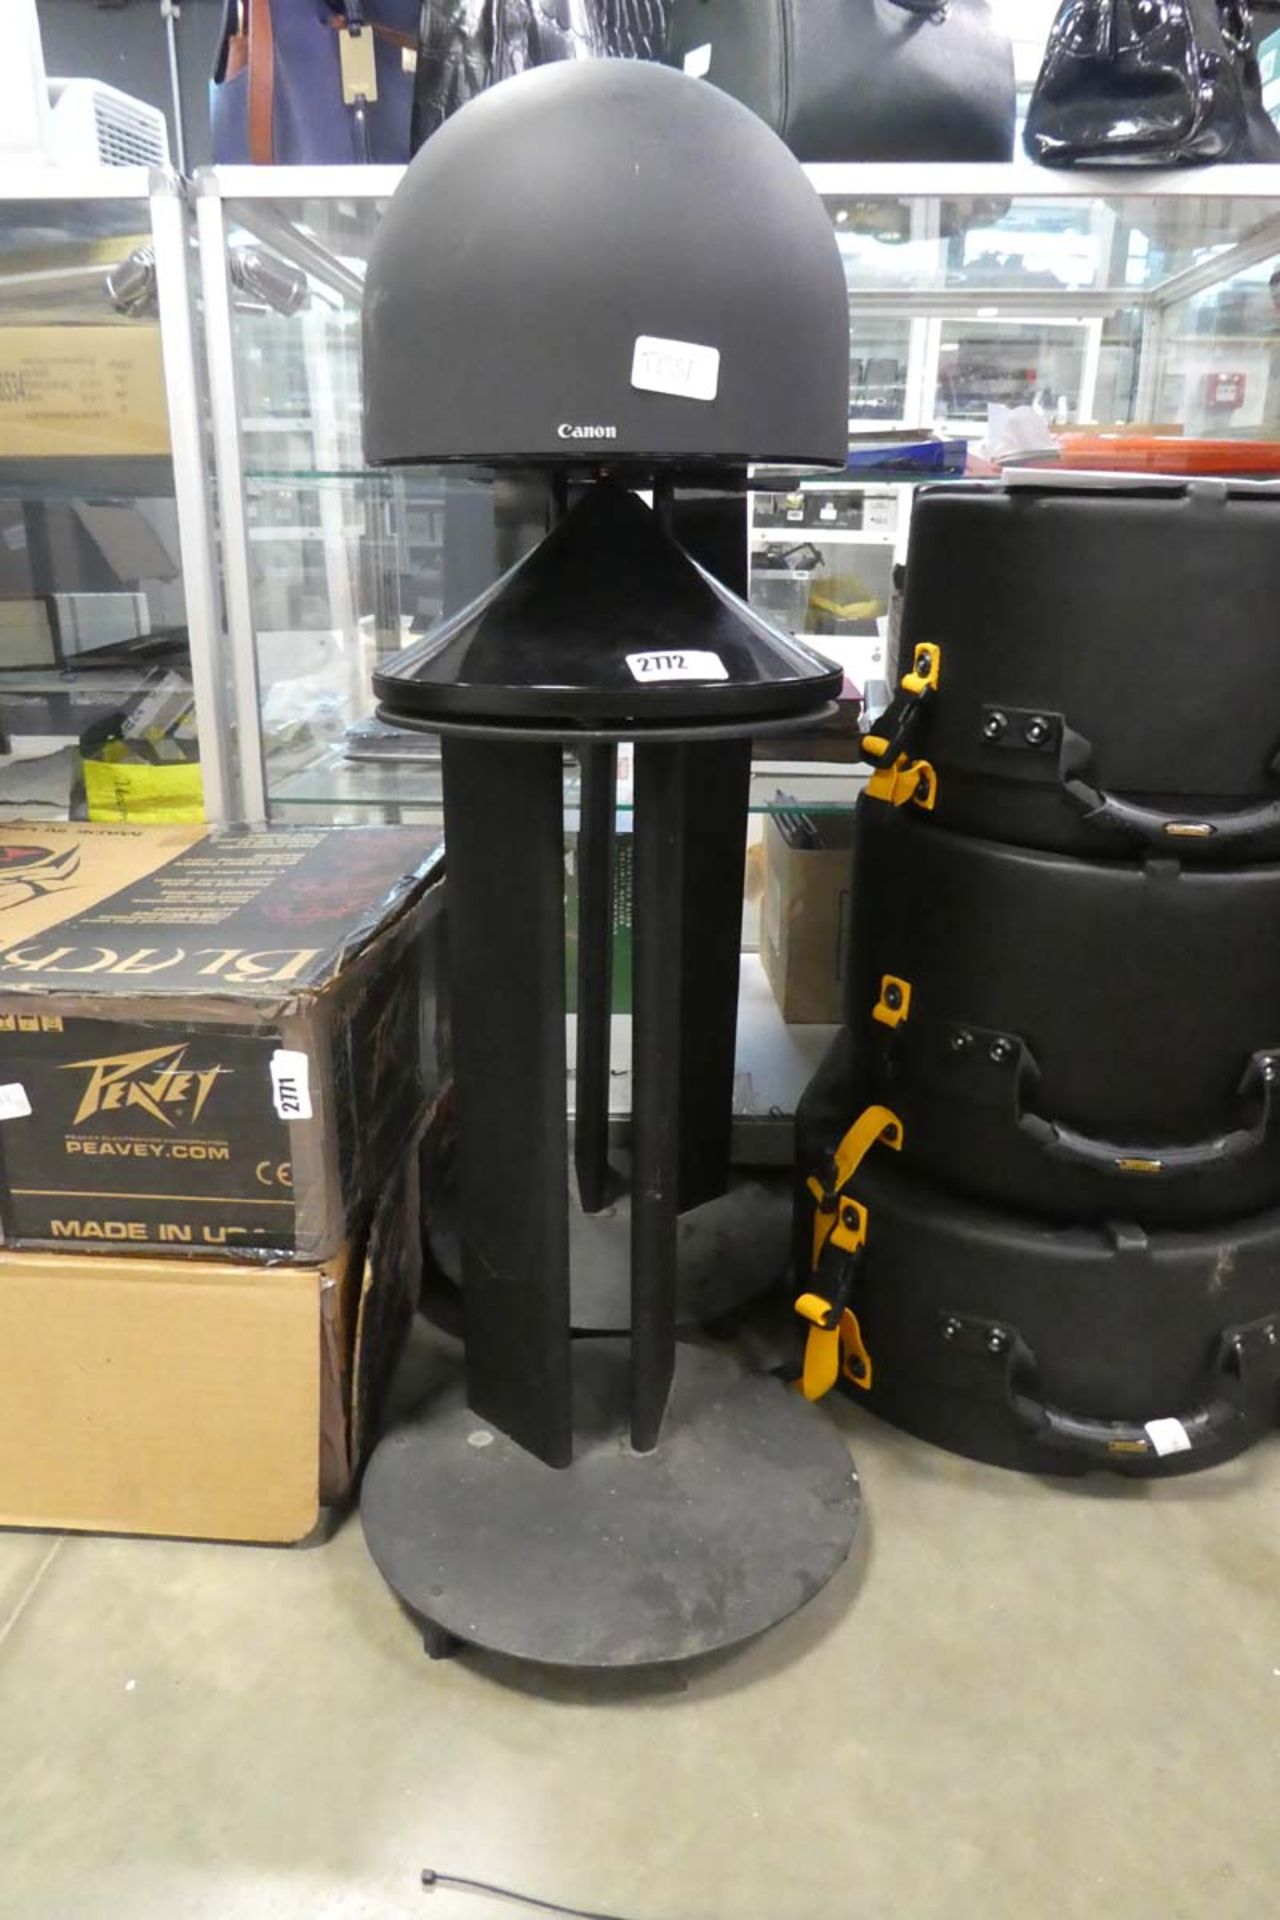 2709 - Pair of Canon floor standing speakers with stands